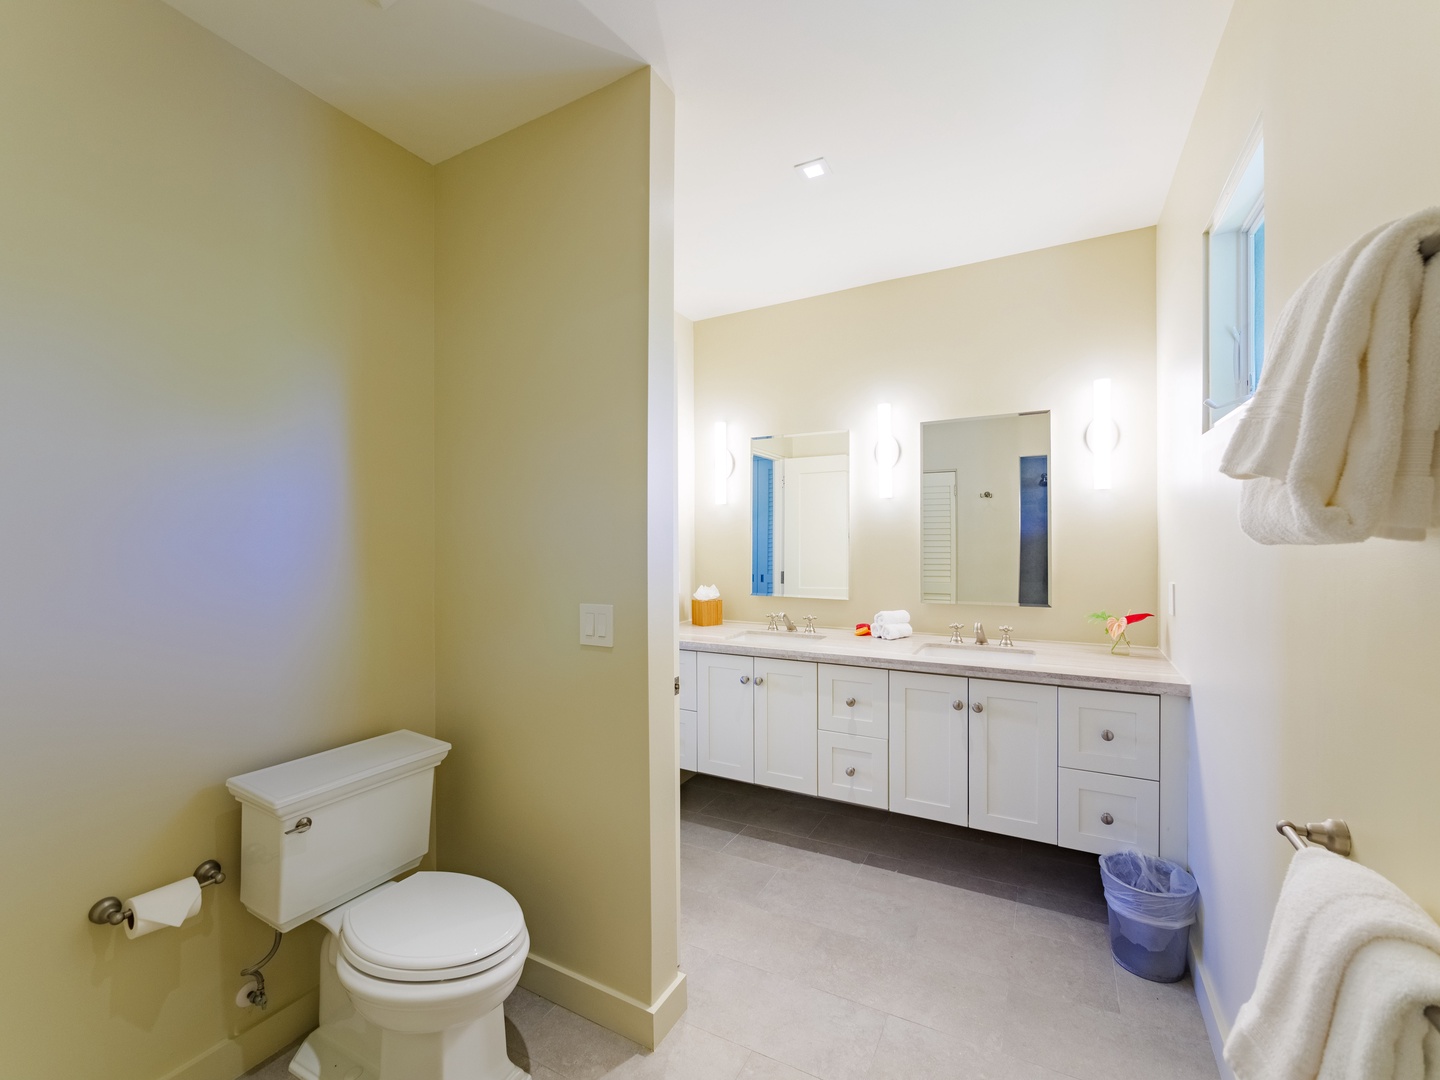 Honolulu Vacation Rentals, Paradise Beach Estate - With a wide vanity space so everyone has a space